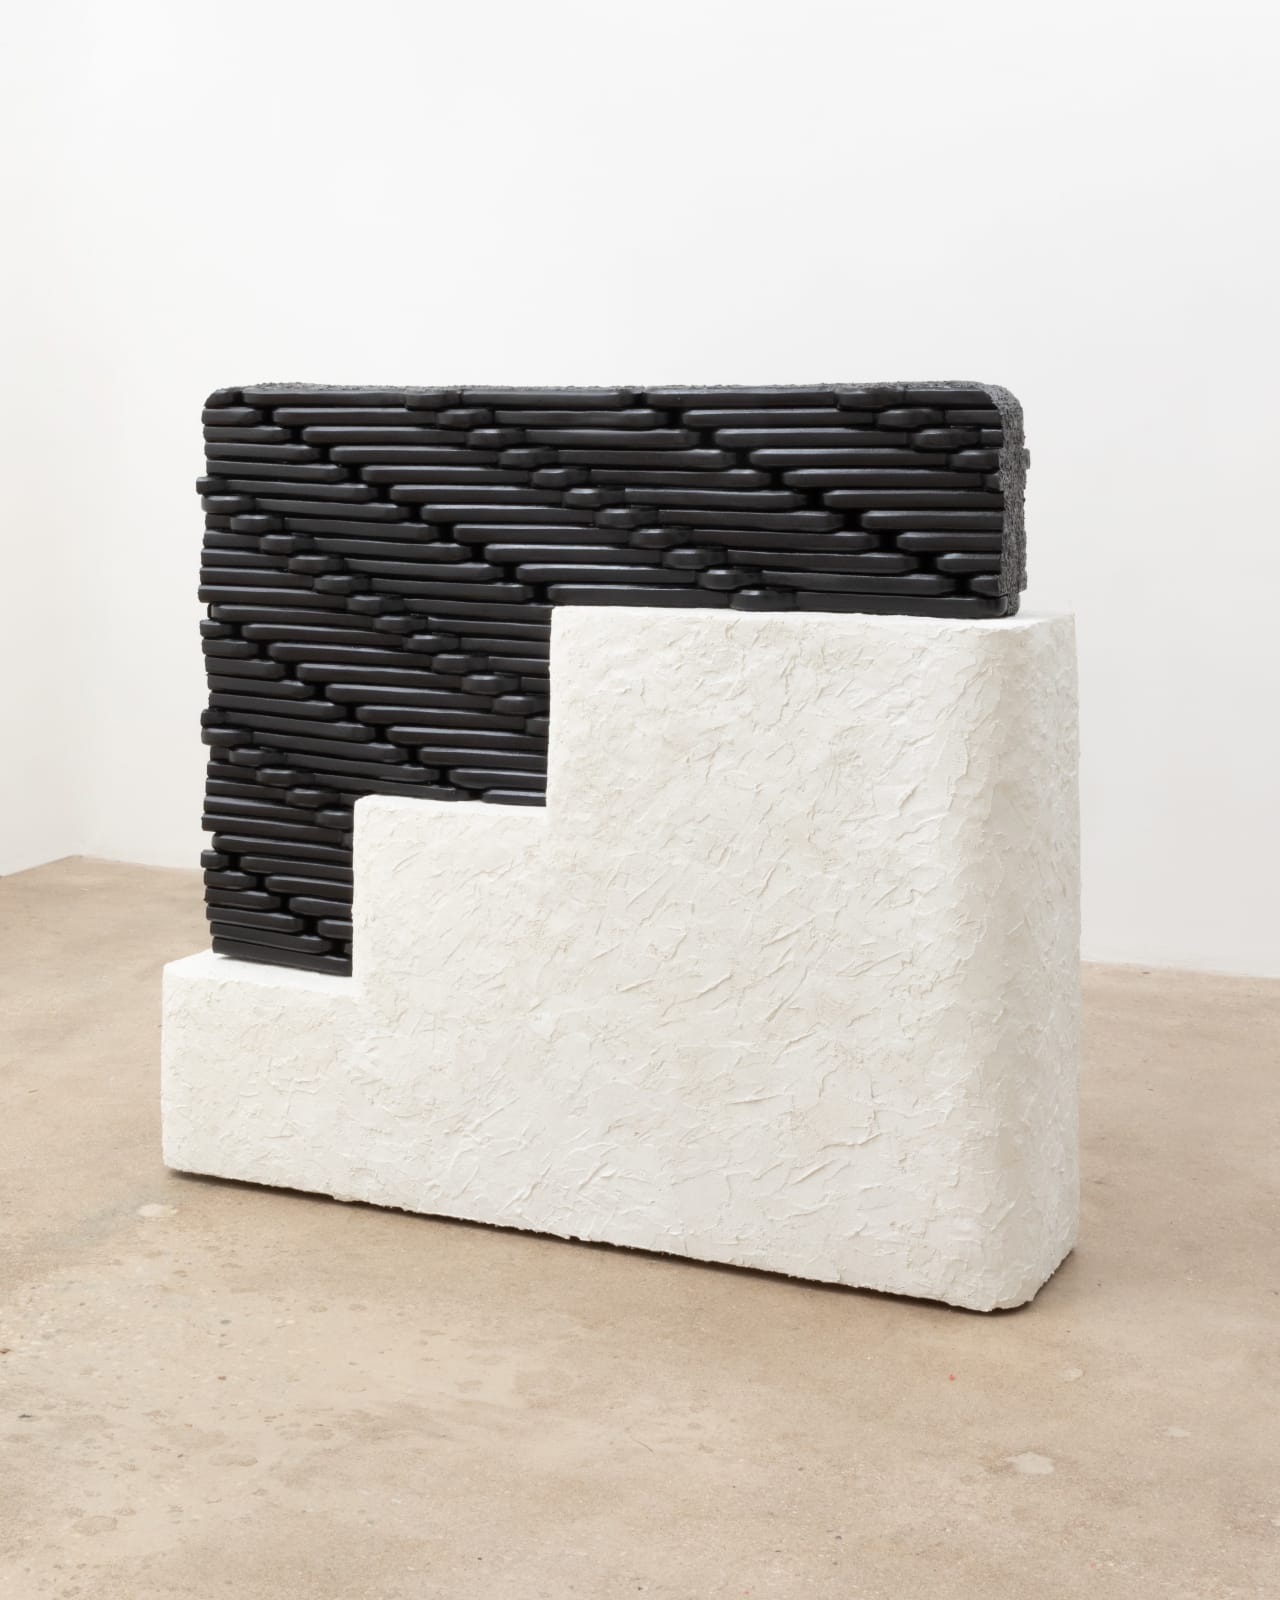 Free-standing sculpture consisting of carved polystyrene pieces aggregated together to form a black hued, interlocking patterned form that fits like a puzzle onto a white rectangular stucco base with tiered steps like a staircase.